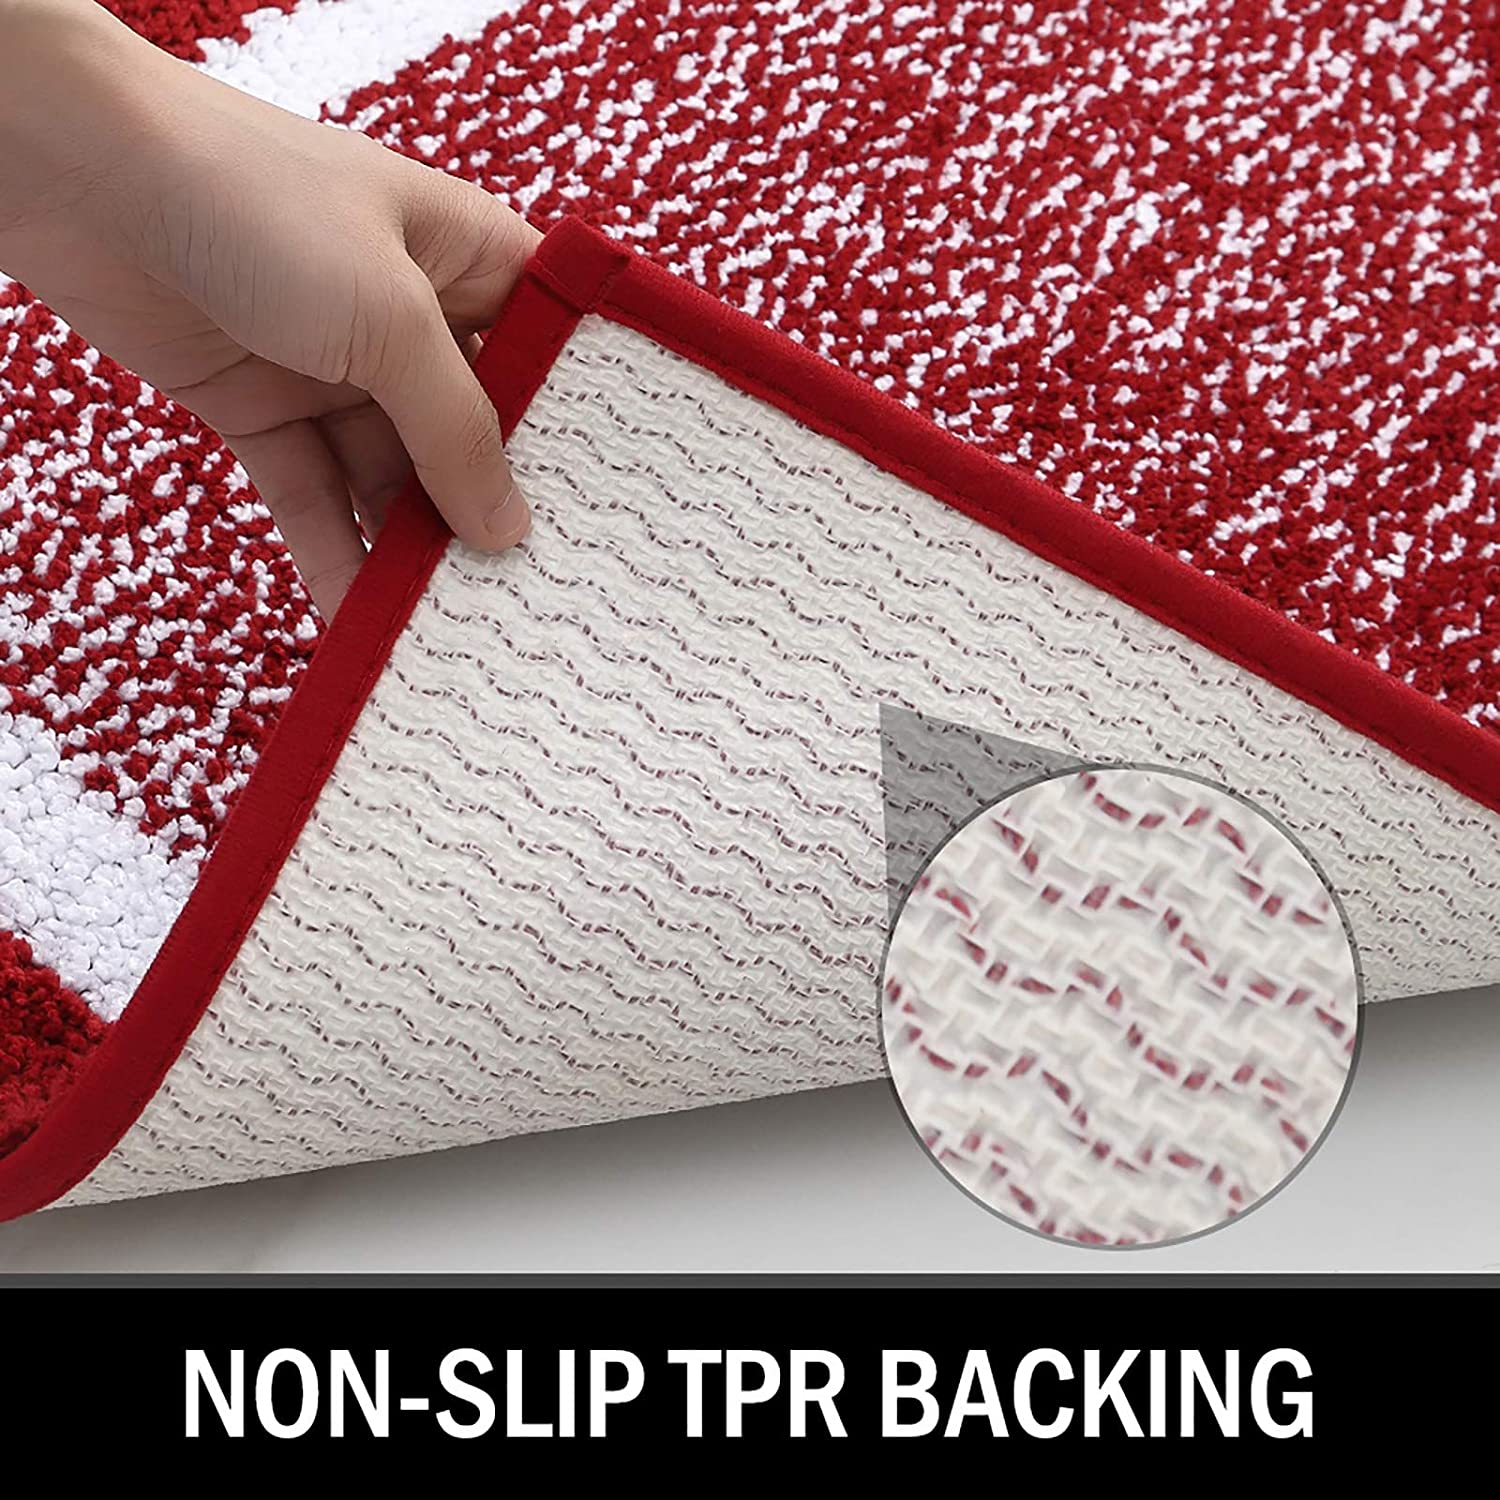 Red Bathroom Rug Mat, Extra Soft and Absorbent Microfiber Bath